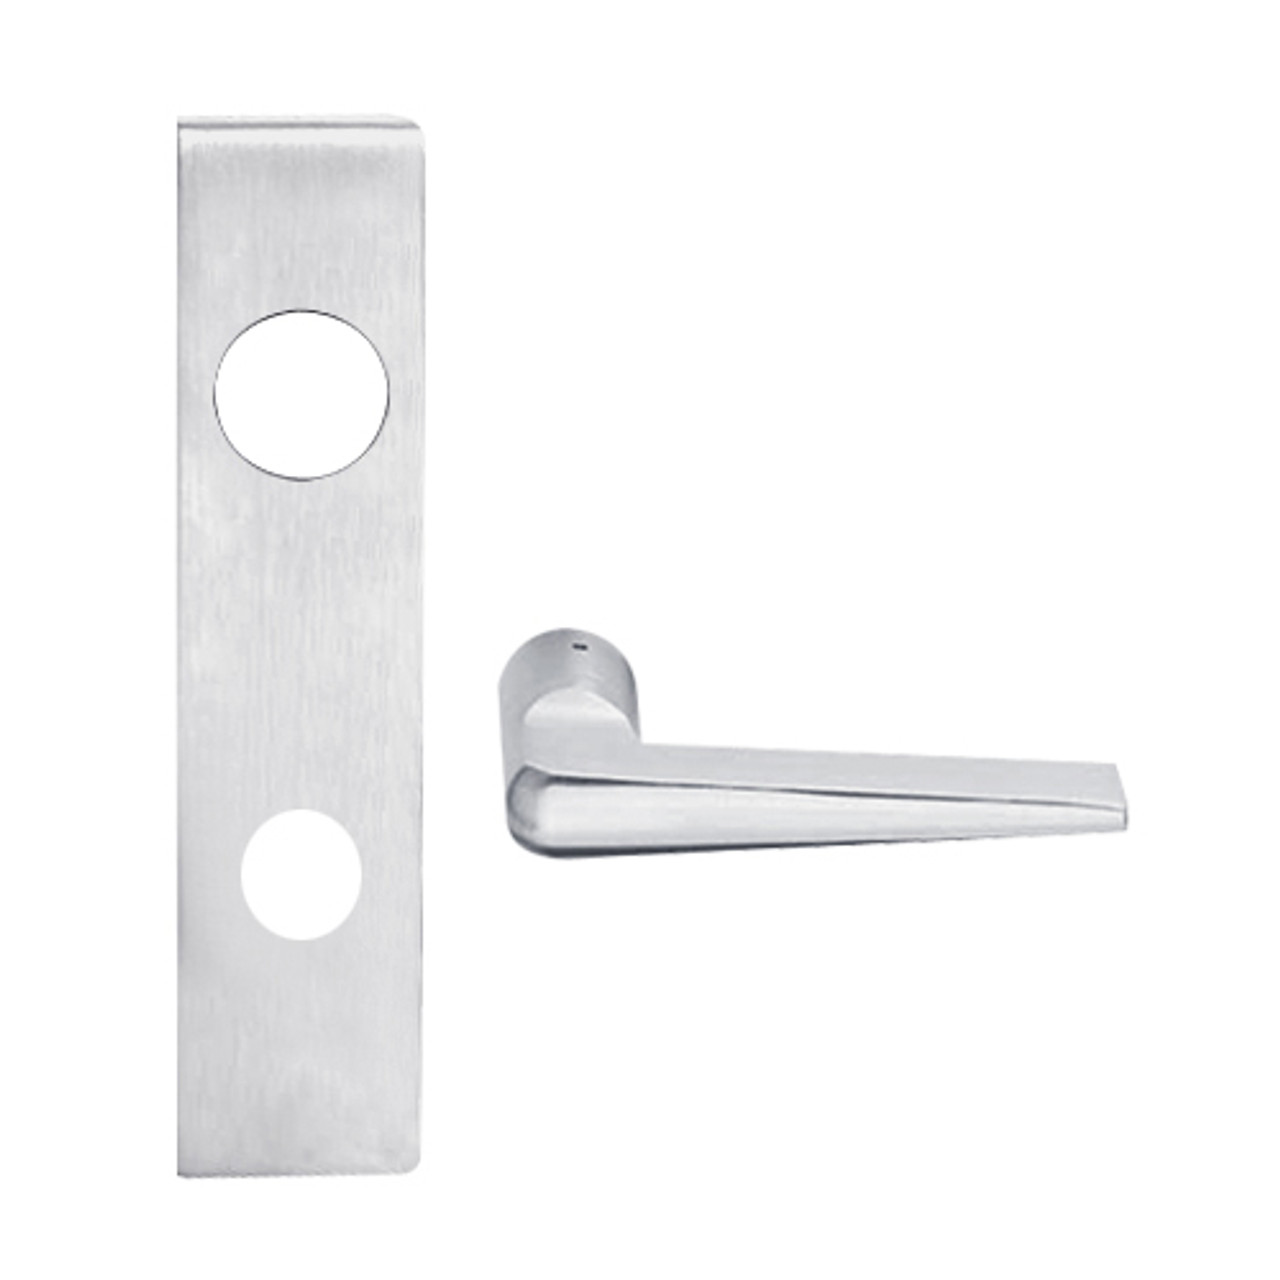 L9050J-05L-626 Schlage L Series Entrance Commercial Mortise Lock with 05 Cast Lever Design Prepped for FSIC in Satin Chrome